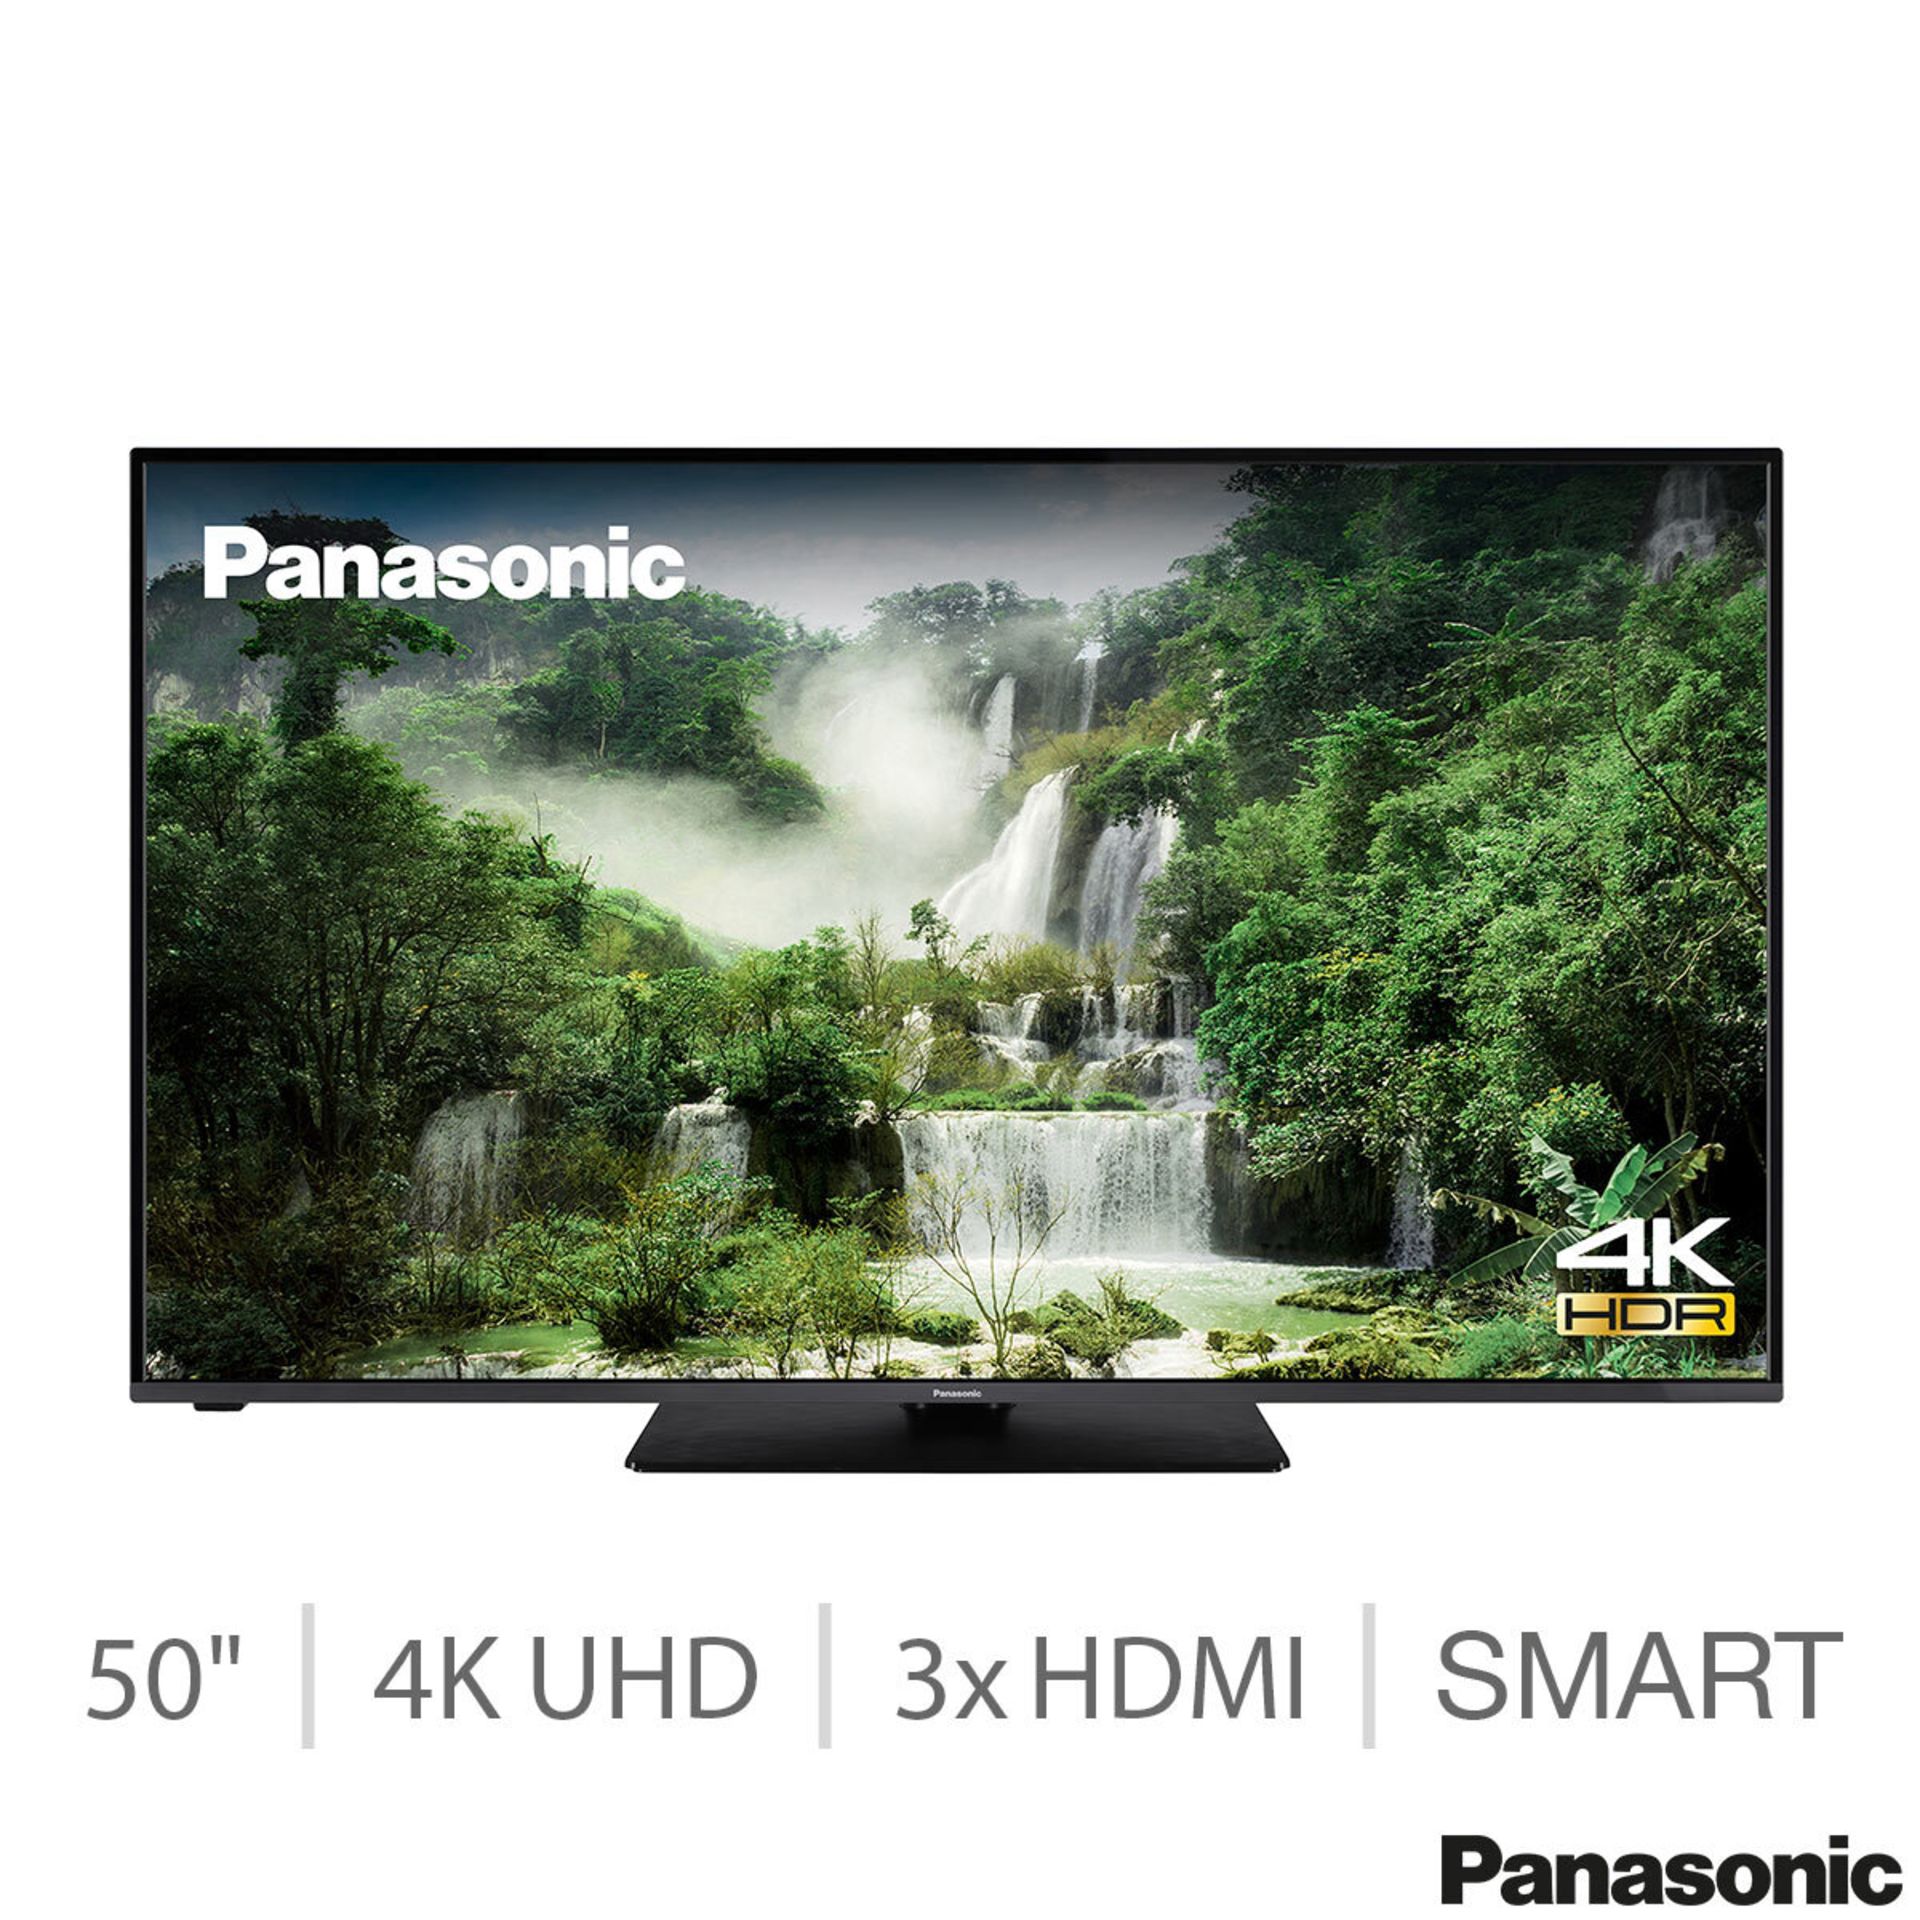 1 BOXED PANASONIC 50LX600BZ 50 INCH 4K ULTRA HD SMART TV WITH REMOTE RRP Â£399 (WORKING, NO STAND)